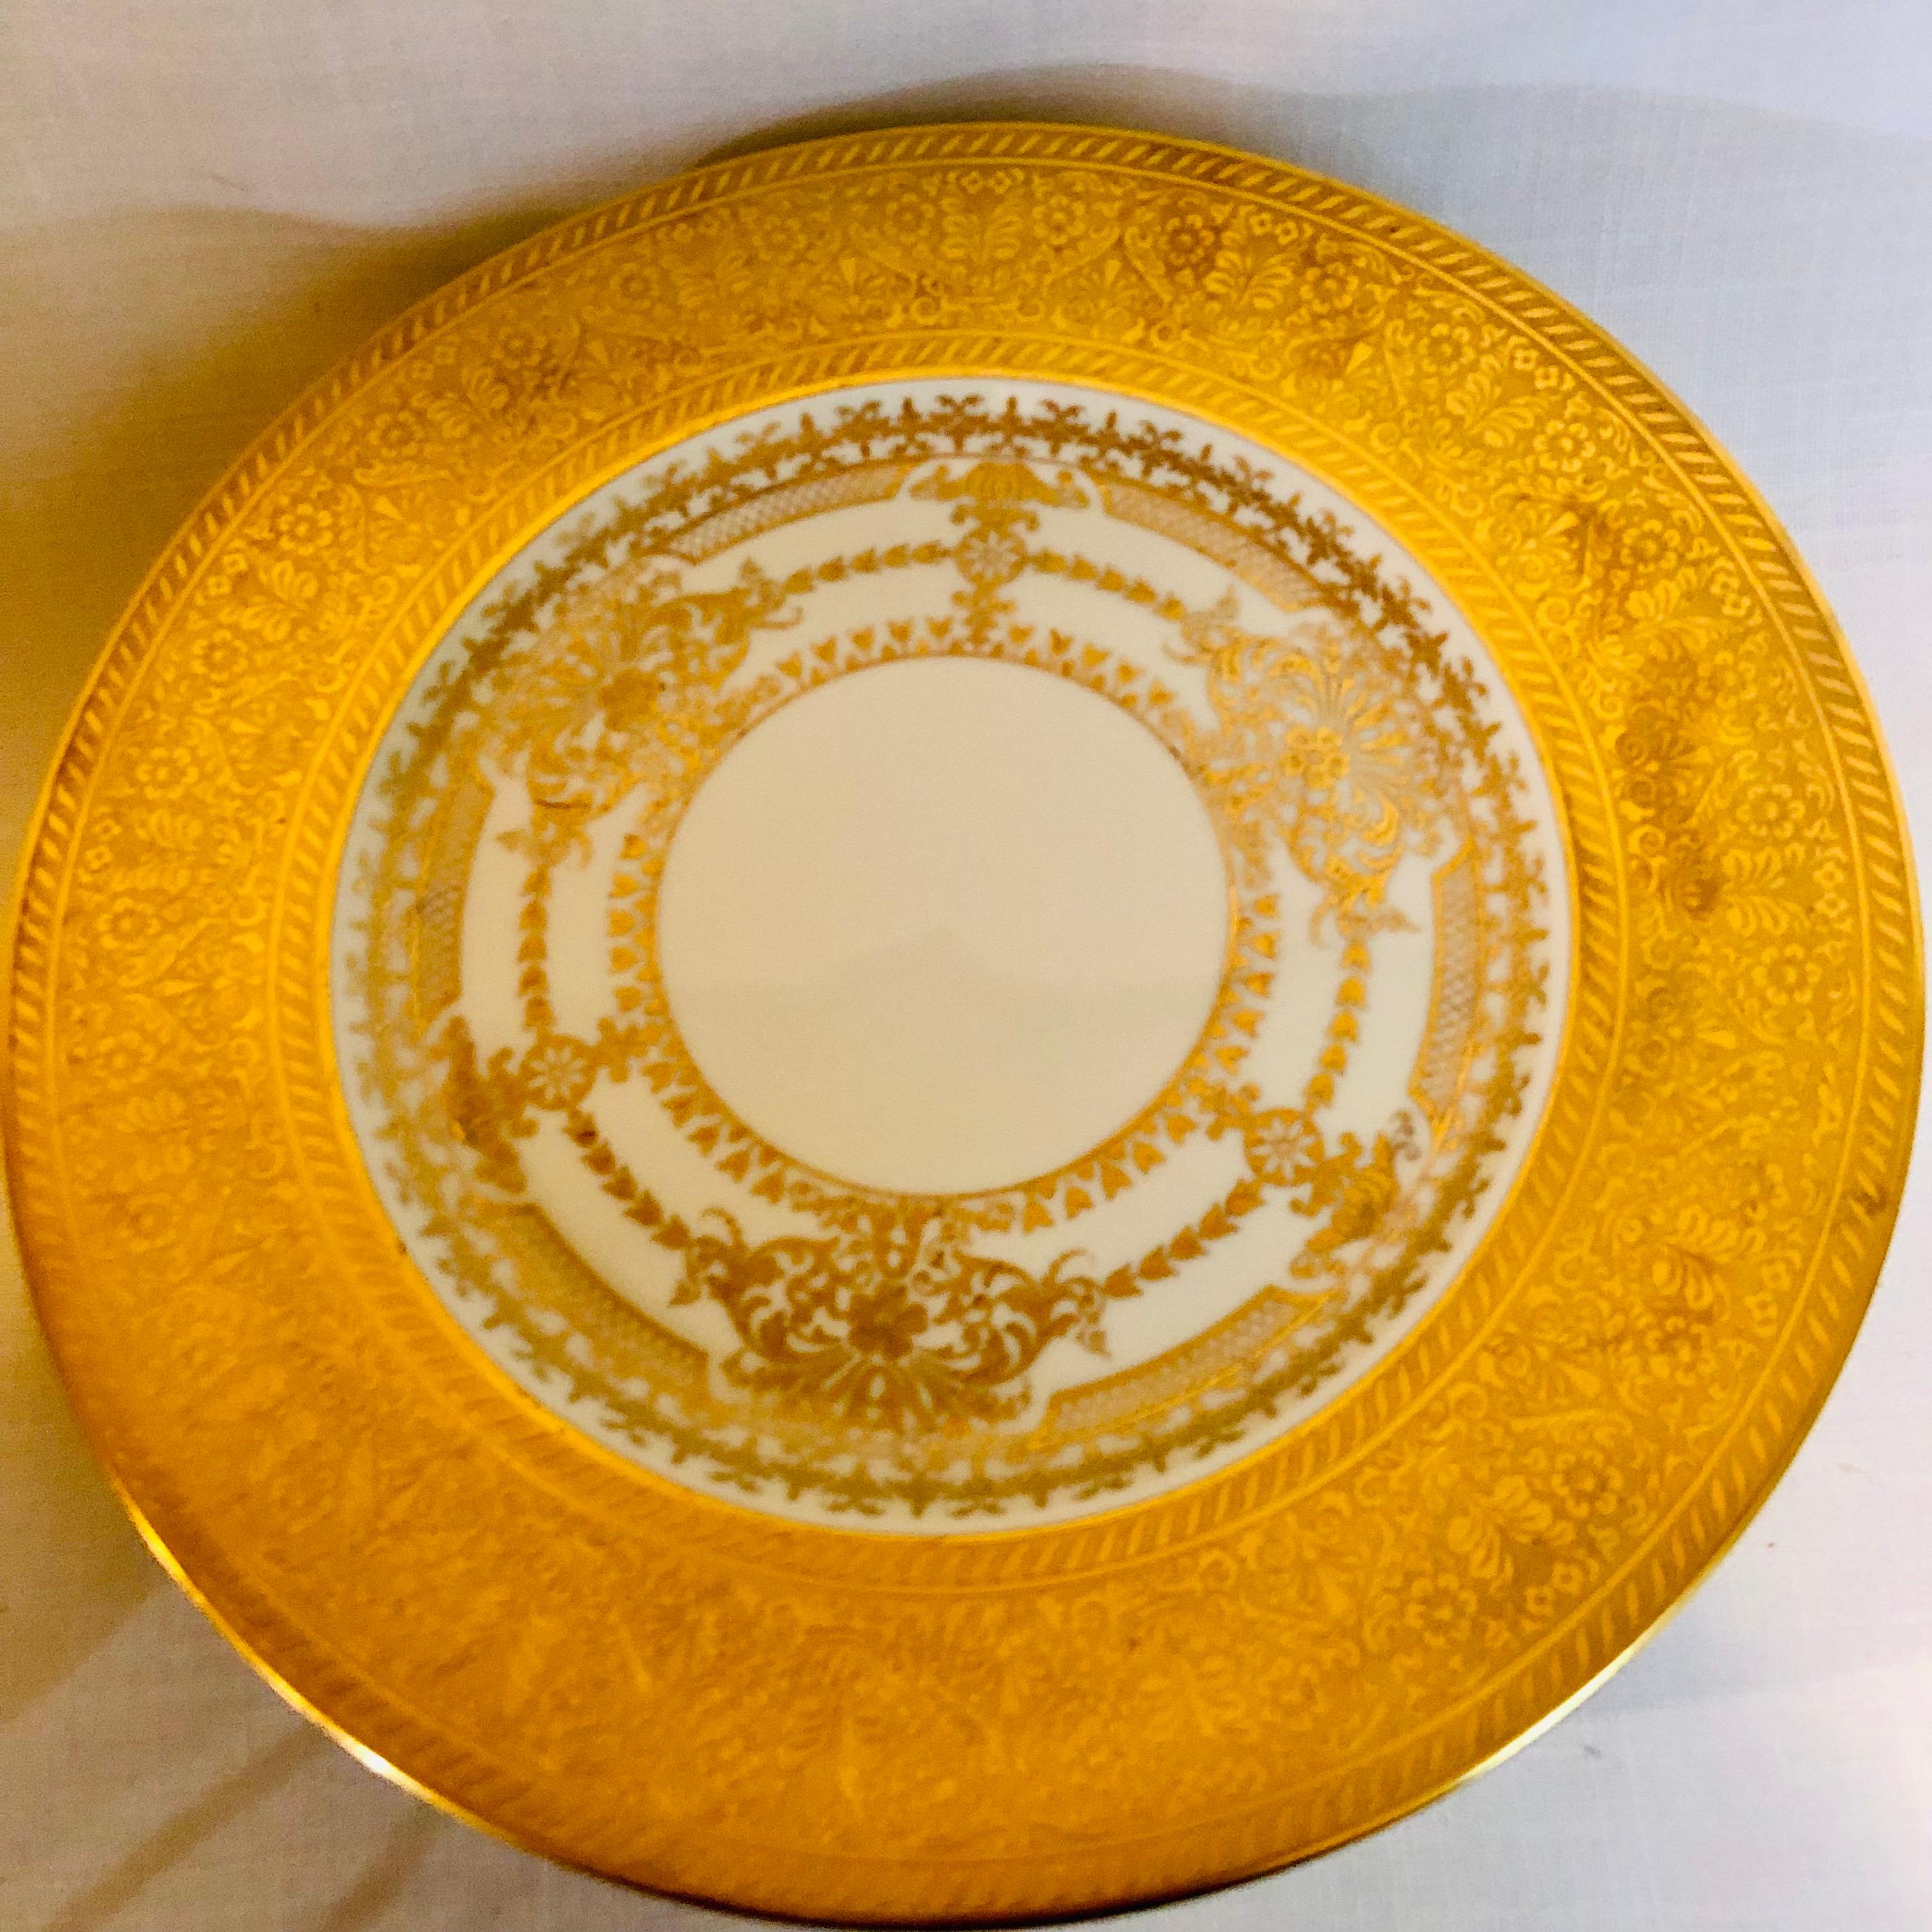 Set of 8 Bavarian Service Plates with Thick Border of Gold Embossed Decoration 2